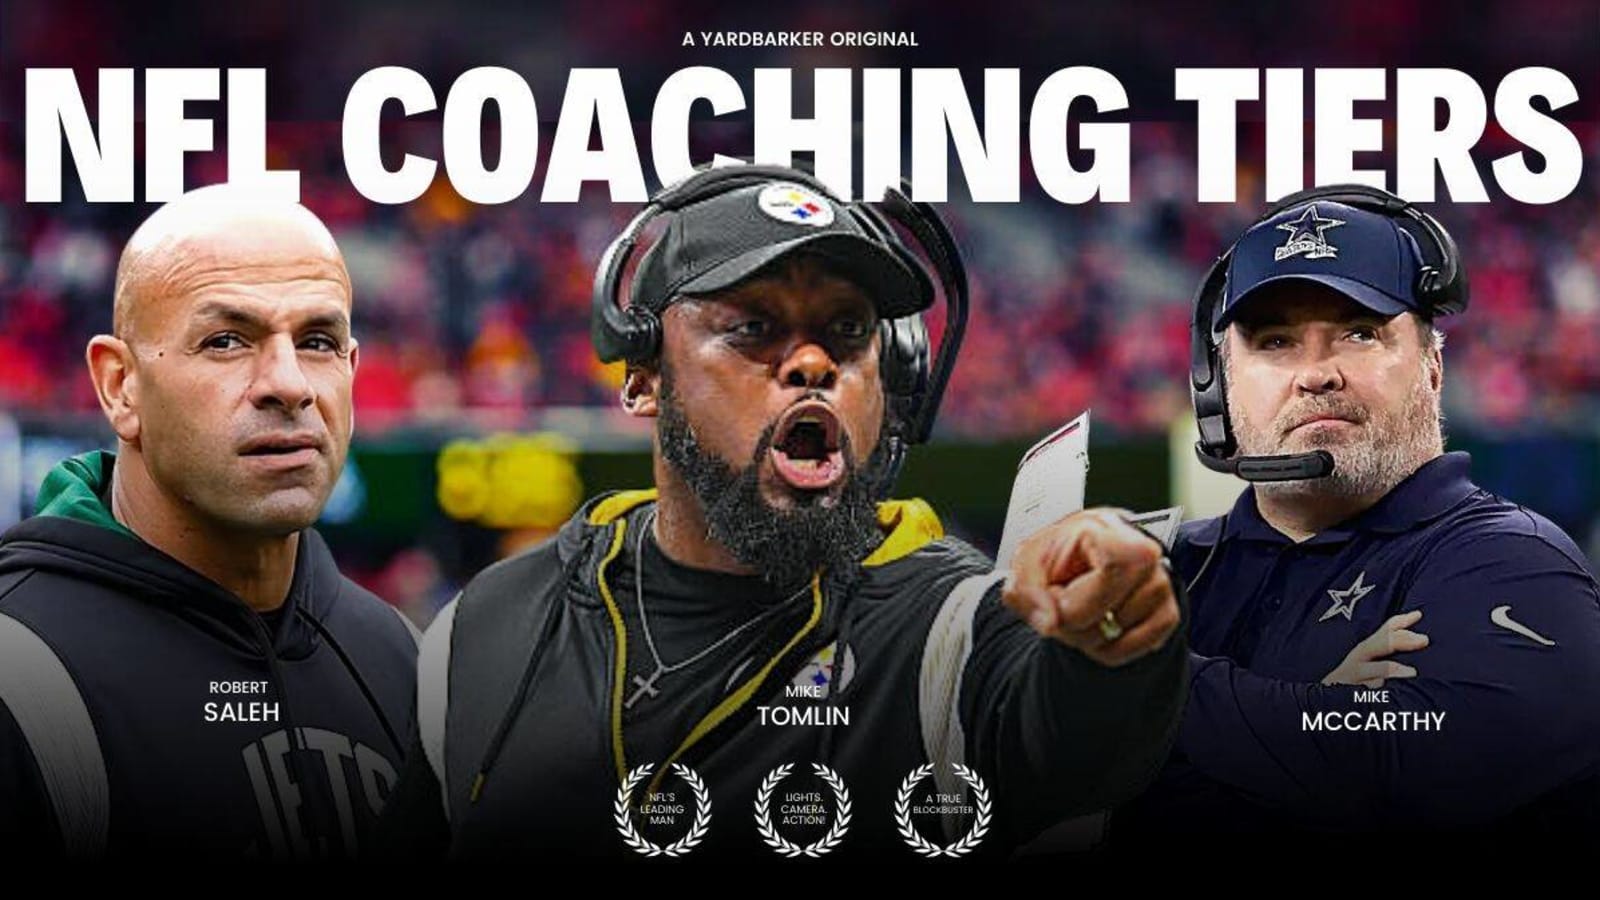 Blockbuster or flop? Spotlighting the best — and worst — NFL head coaches